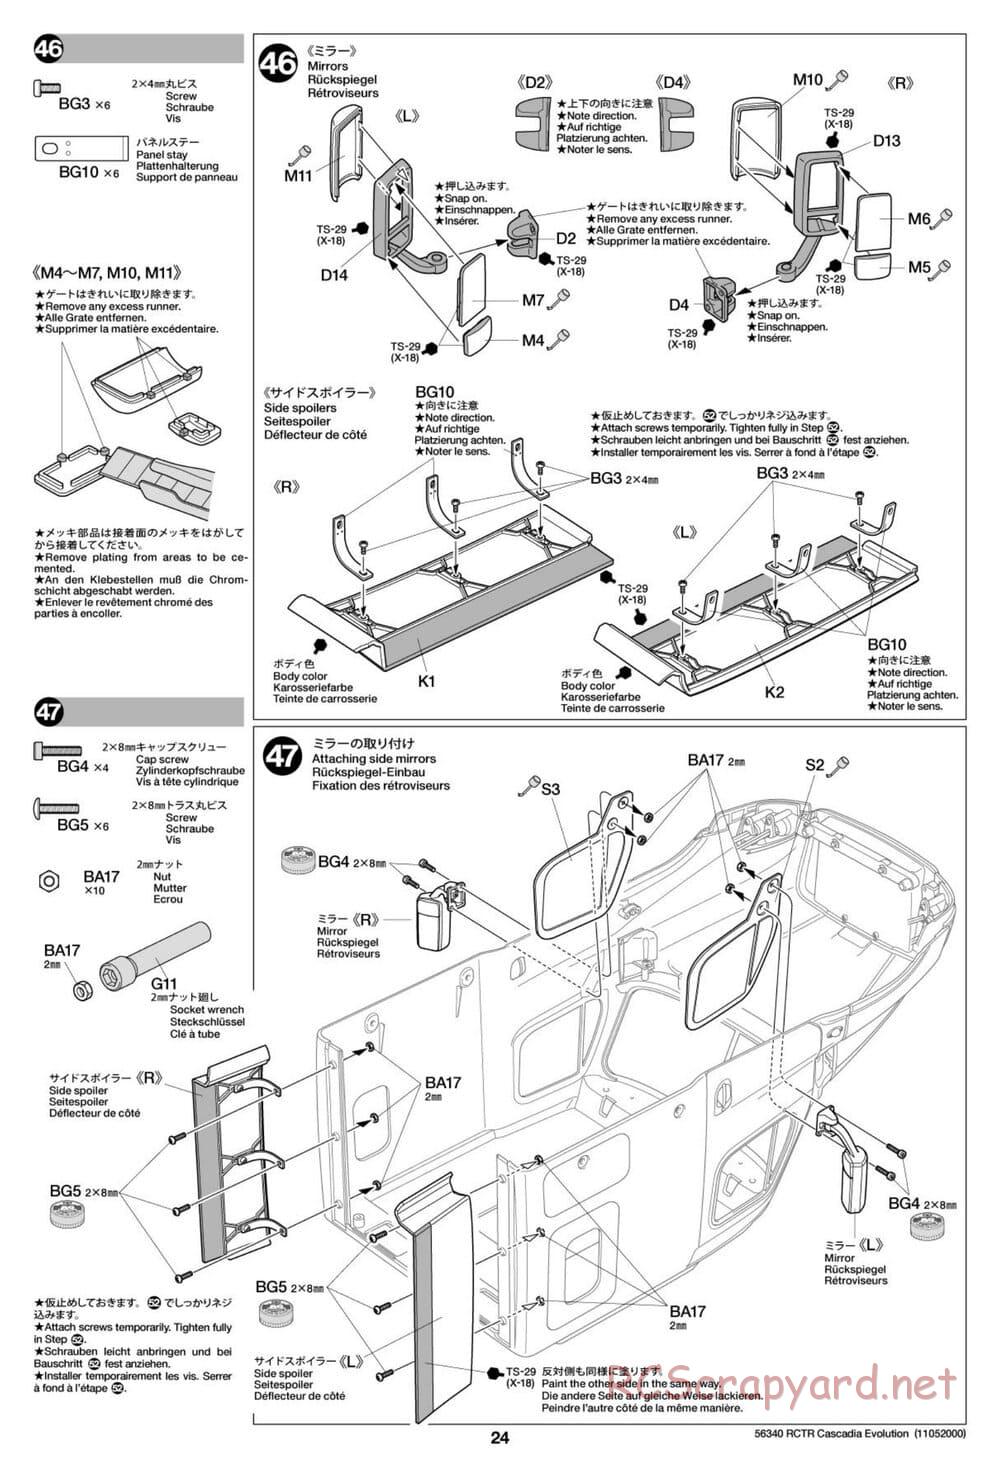 Tamiya - Freightliner Cascadia Evolution Tractor Truck Chassis - Manual - Page 24